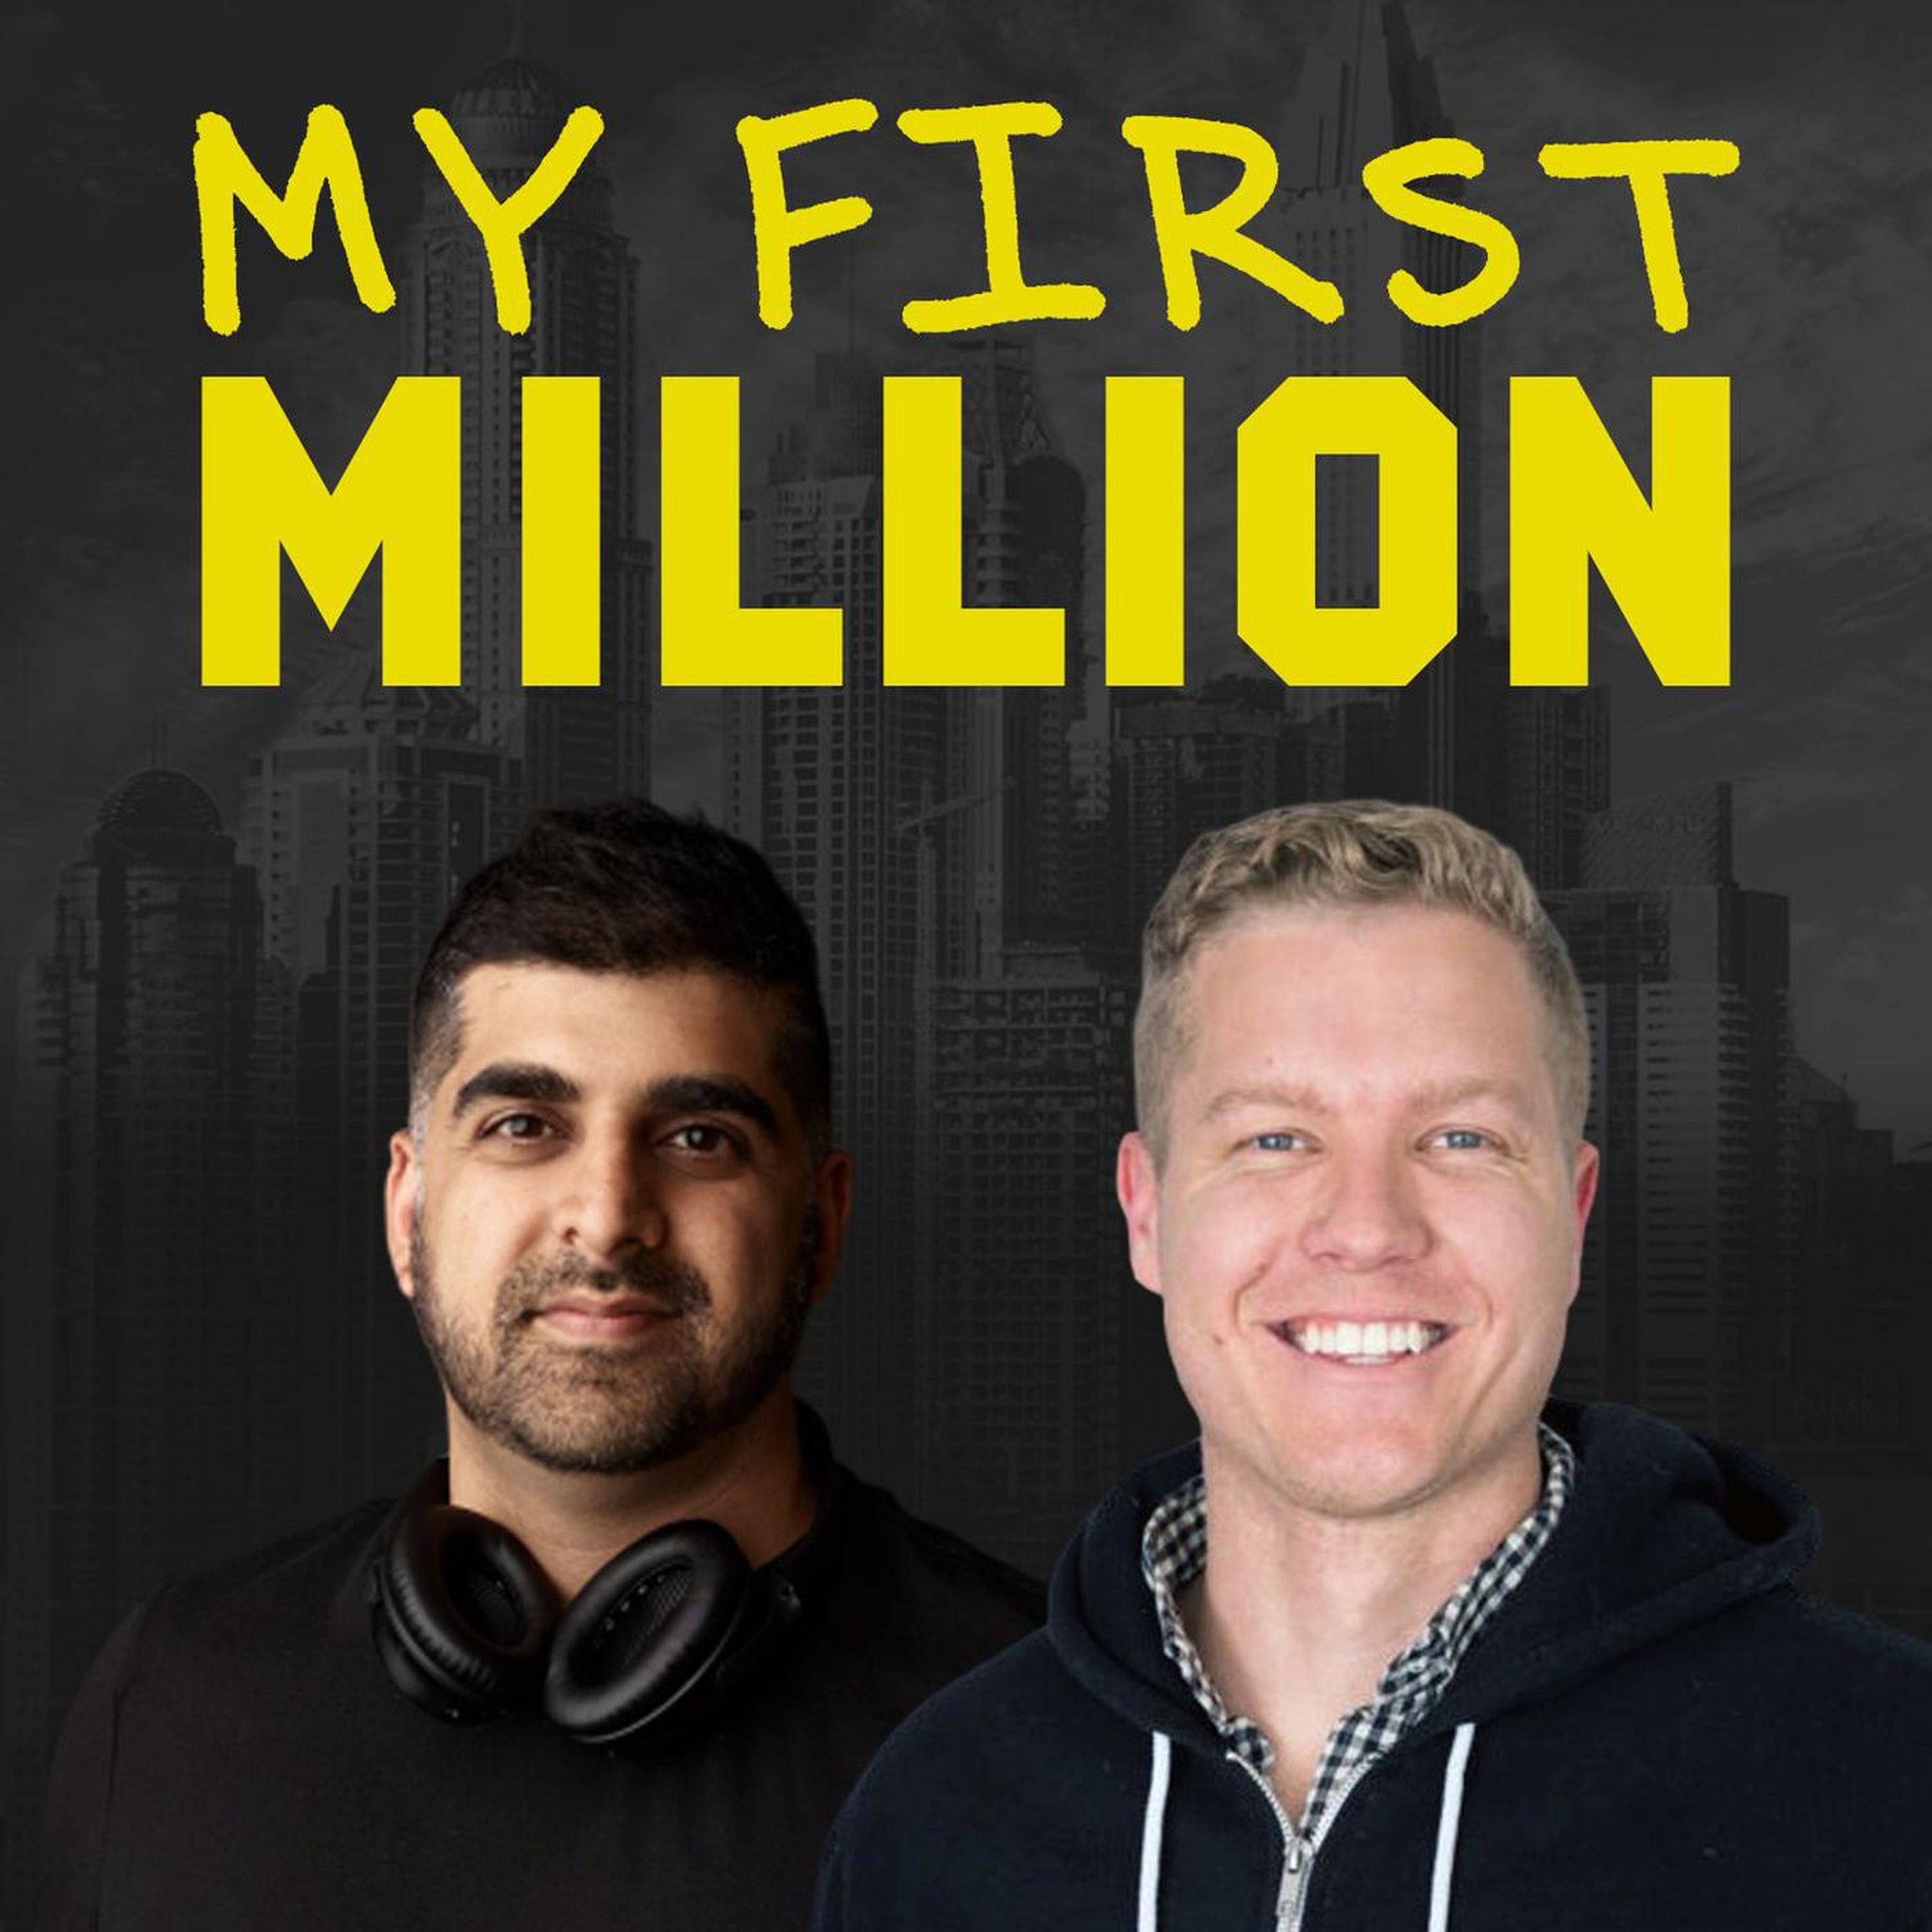 #142 - Digital Meet and Greets, A Little Known $30m Empire, And Shaan's Twitter Controversy